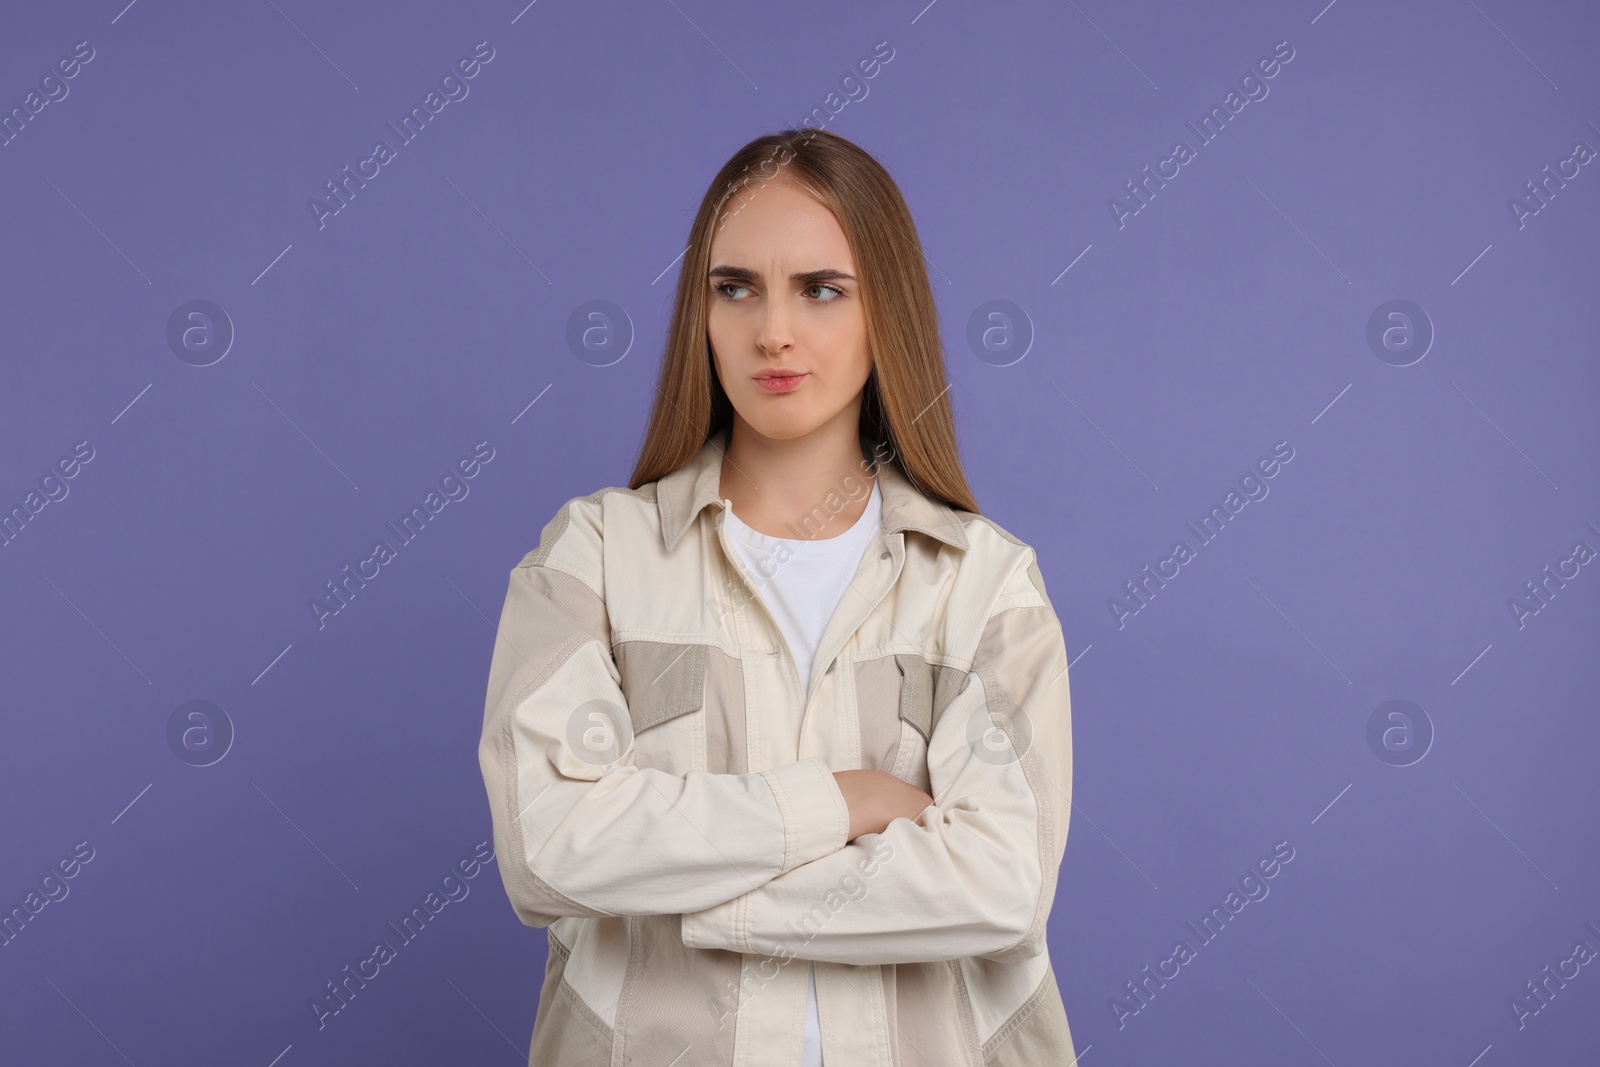 Photo of Resentful woman with crossed arms on violet background